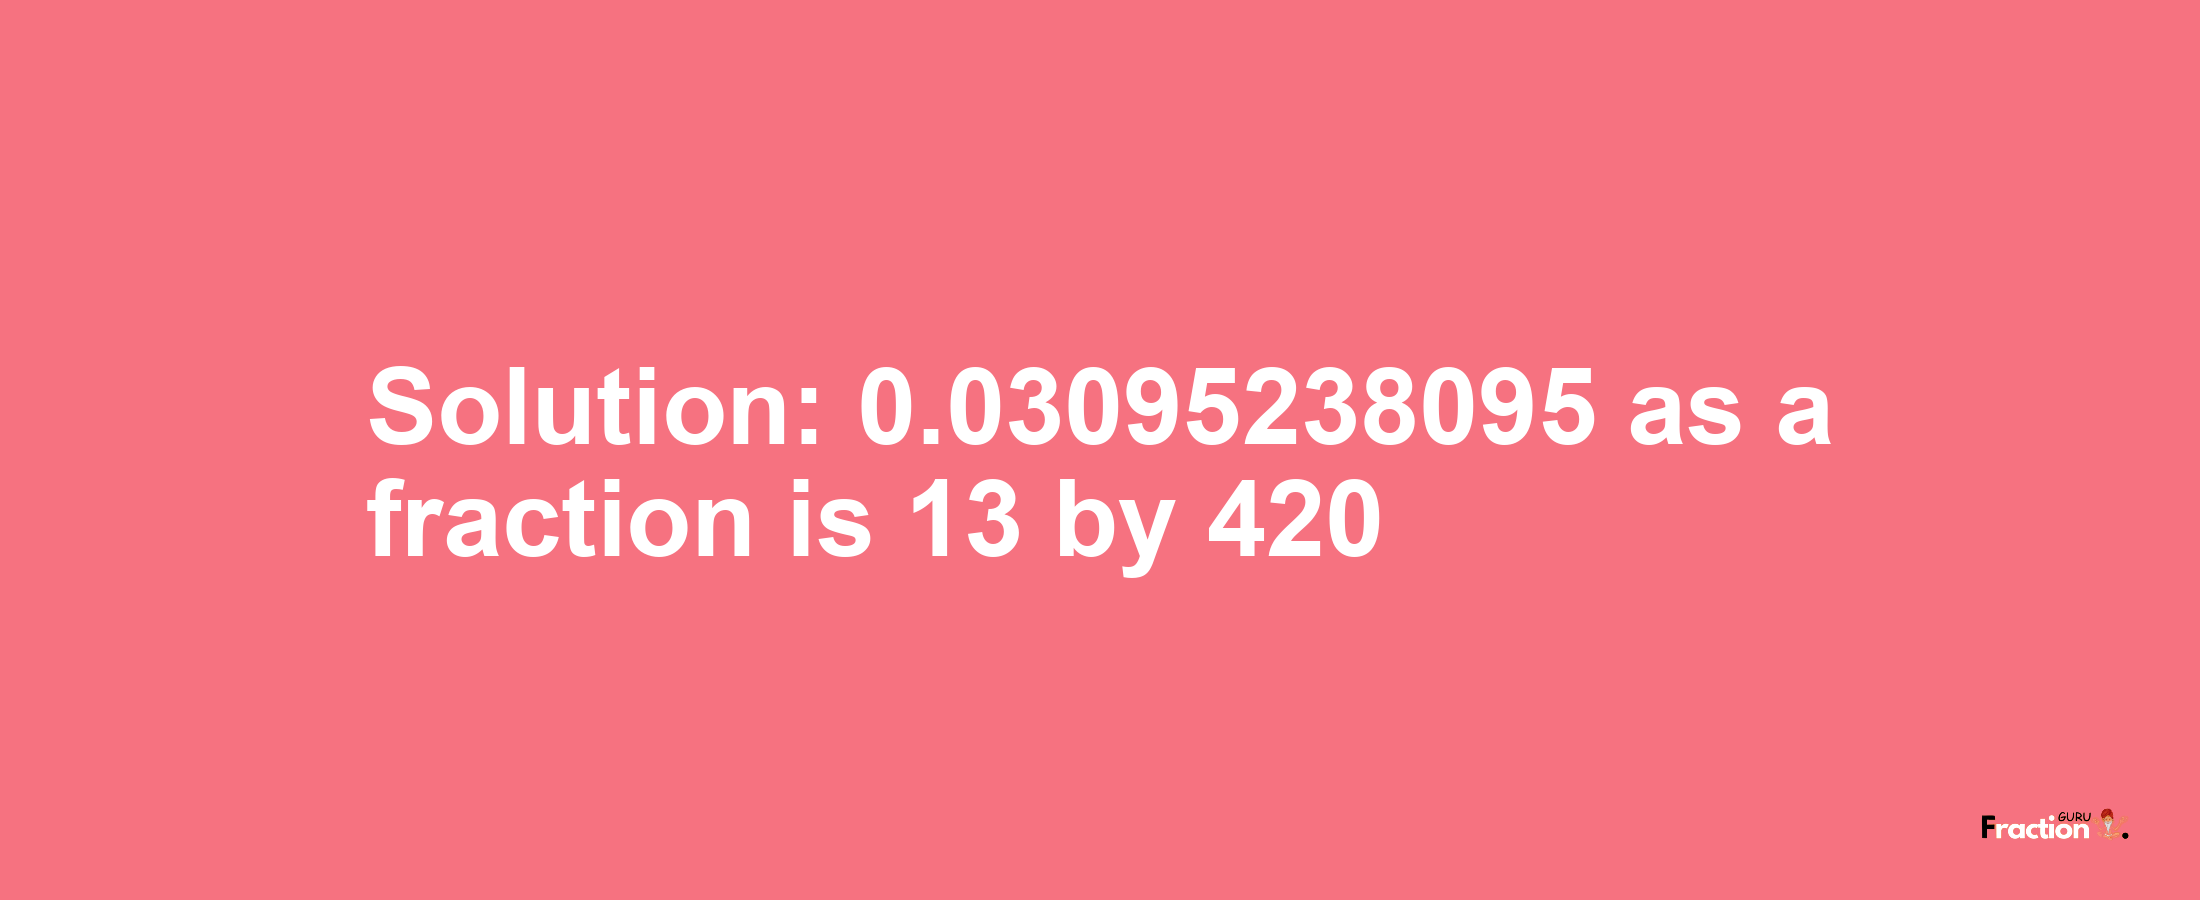 Solution:0.03095238095 as a fraction is 13/420